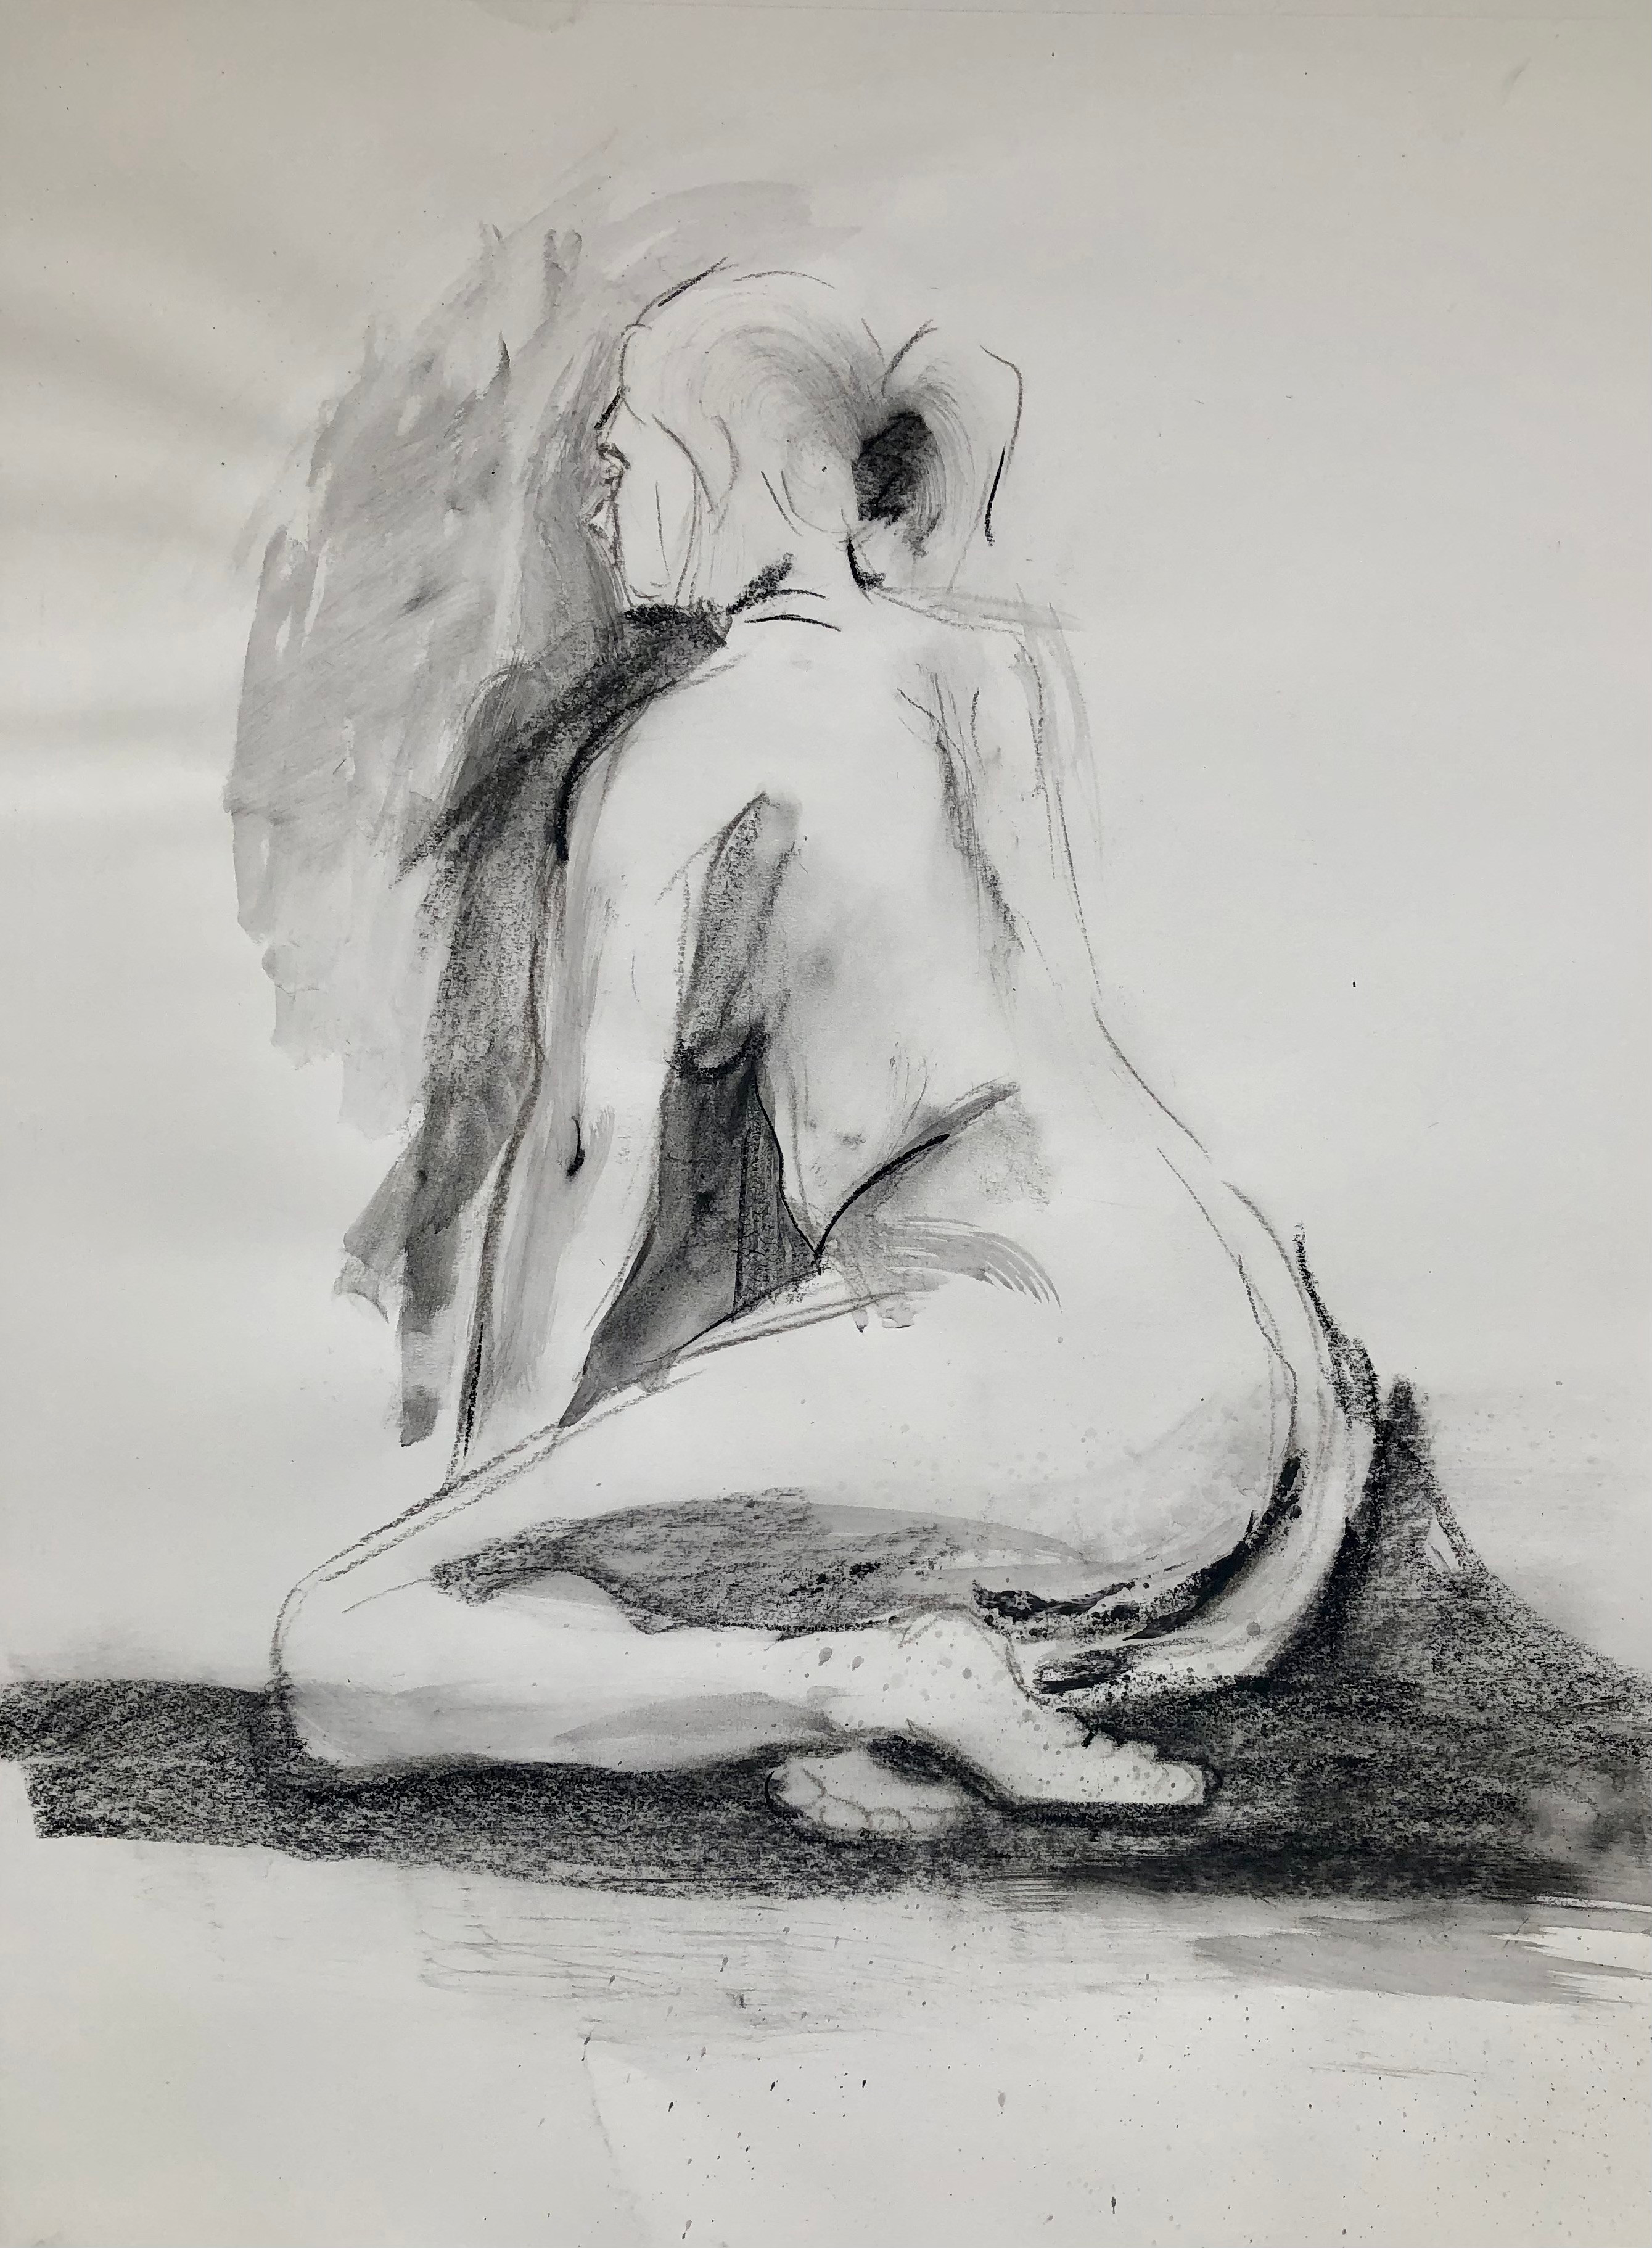 Expressive figures. Charcoal and water on white paper.